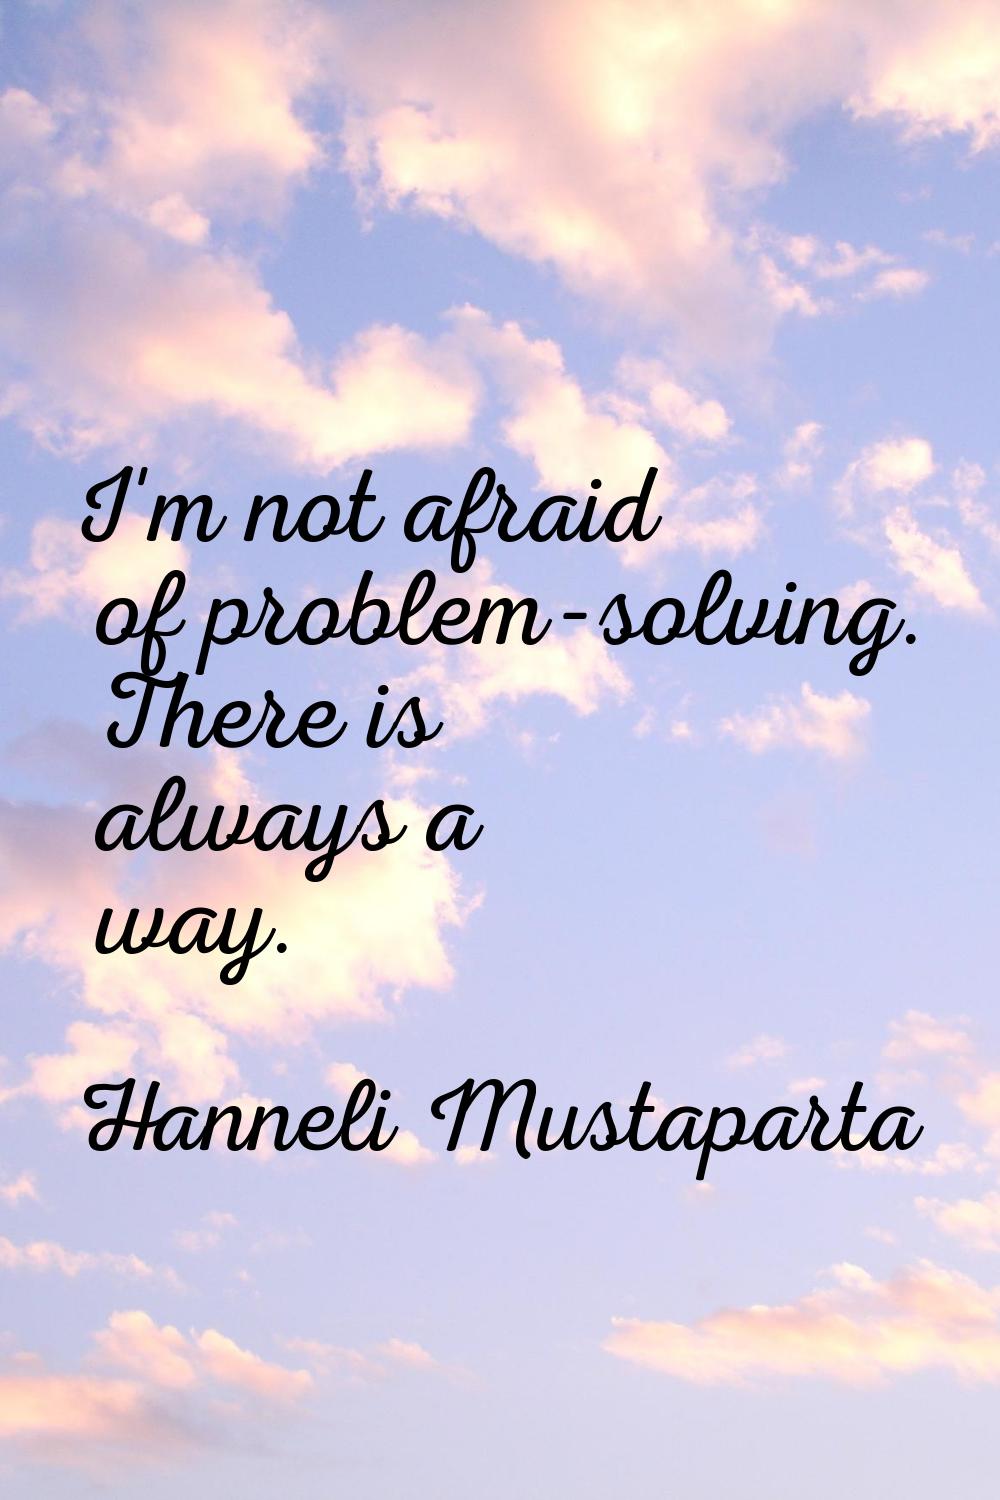 I'm not afraid of problem-solving. There is always a way.